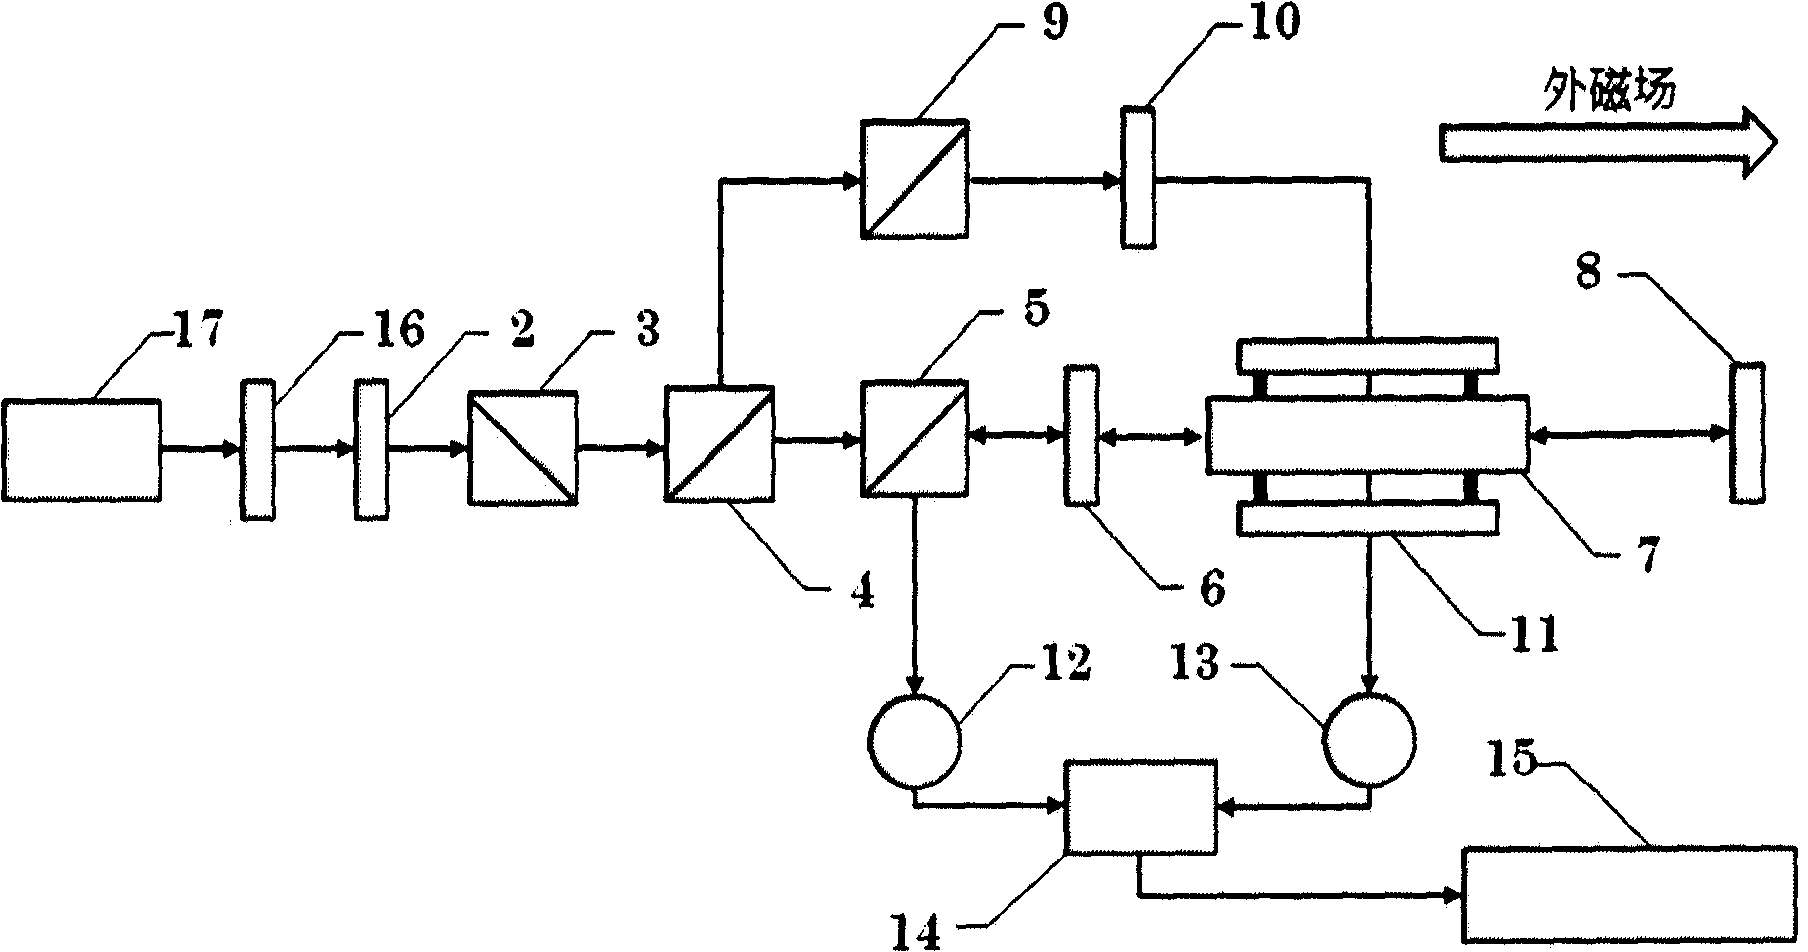 An optomagnetic double resonance device